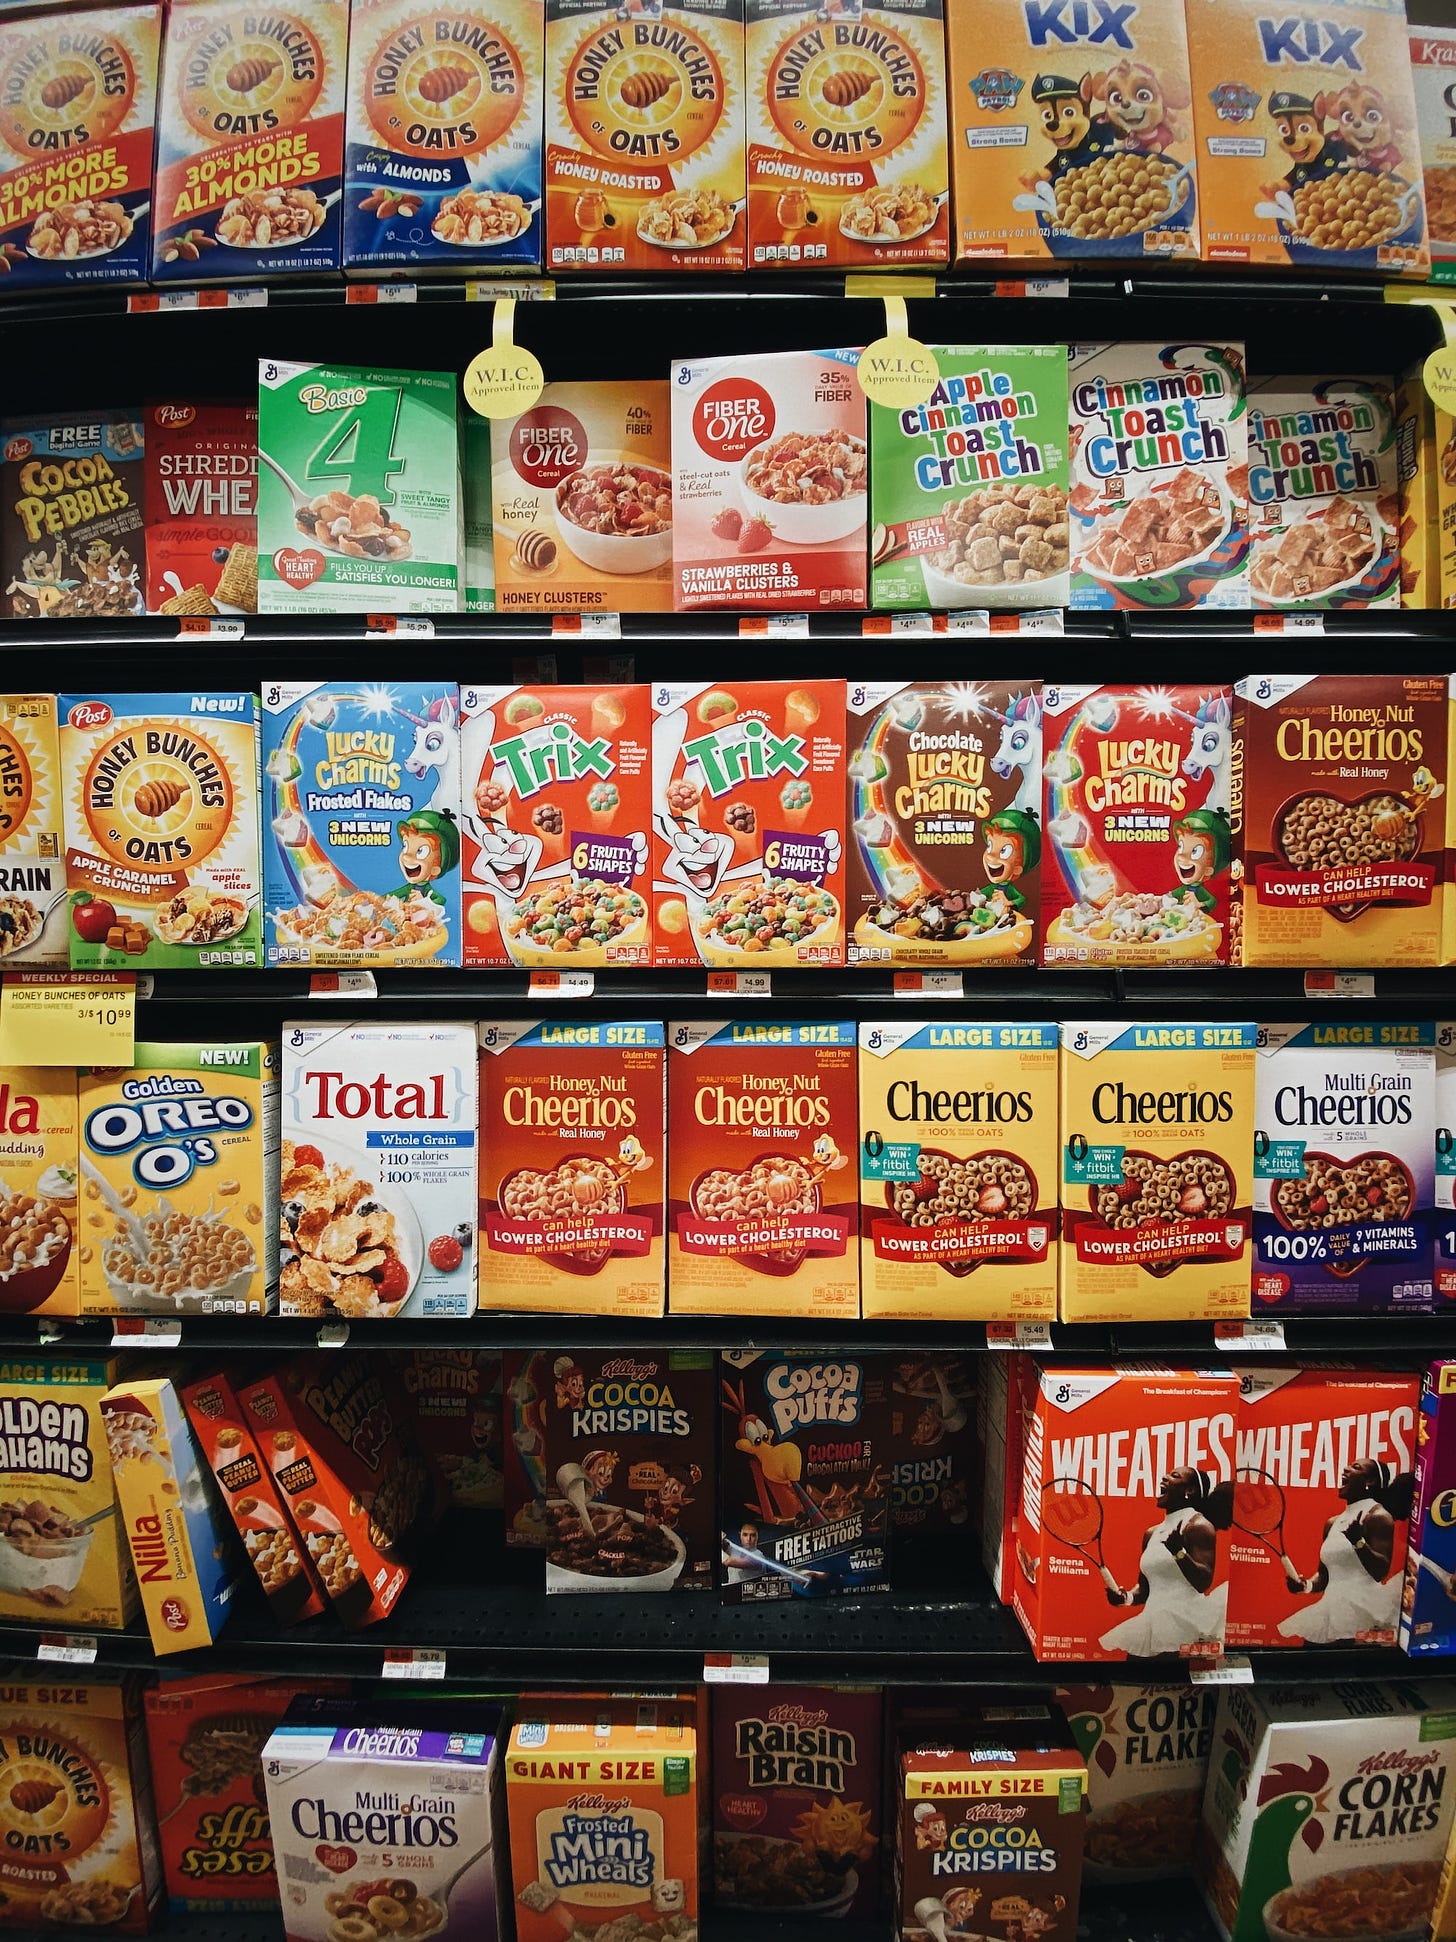 Overcoming High Prices: General Mills Plans to Use Advertising to Boost Sagging Sales Volumes